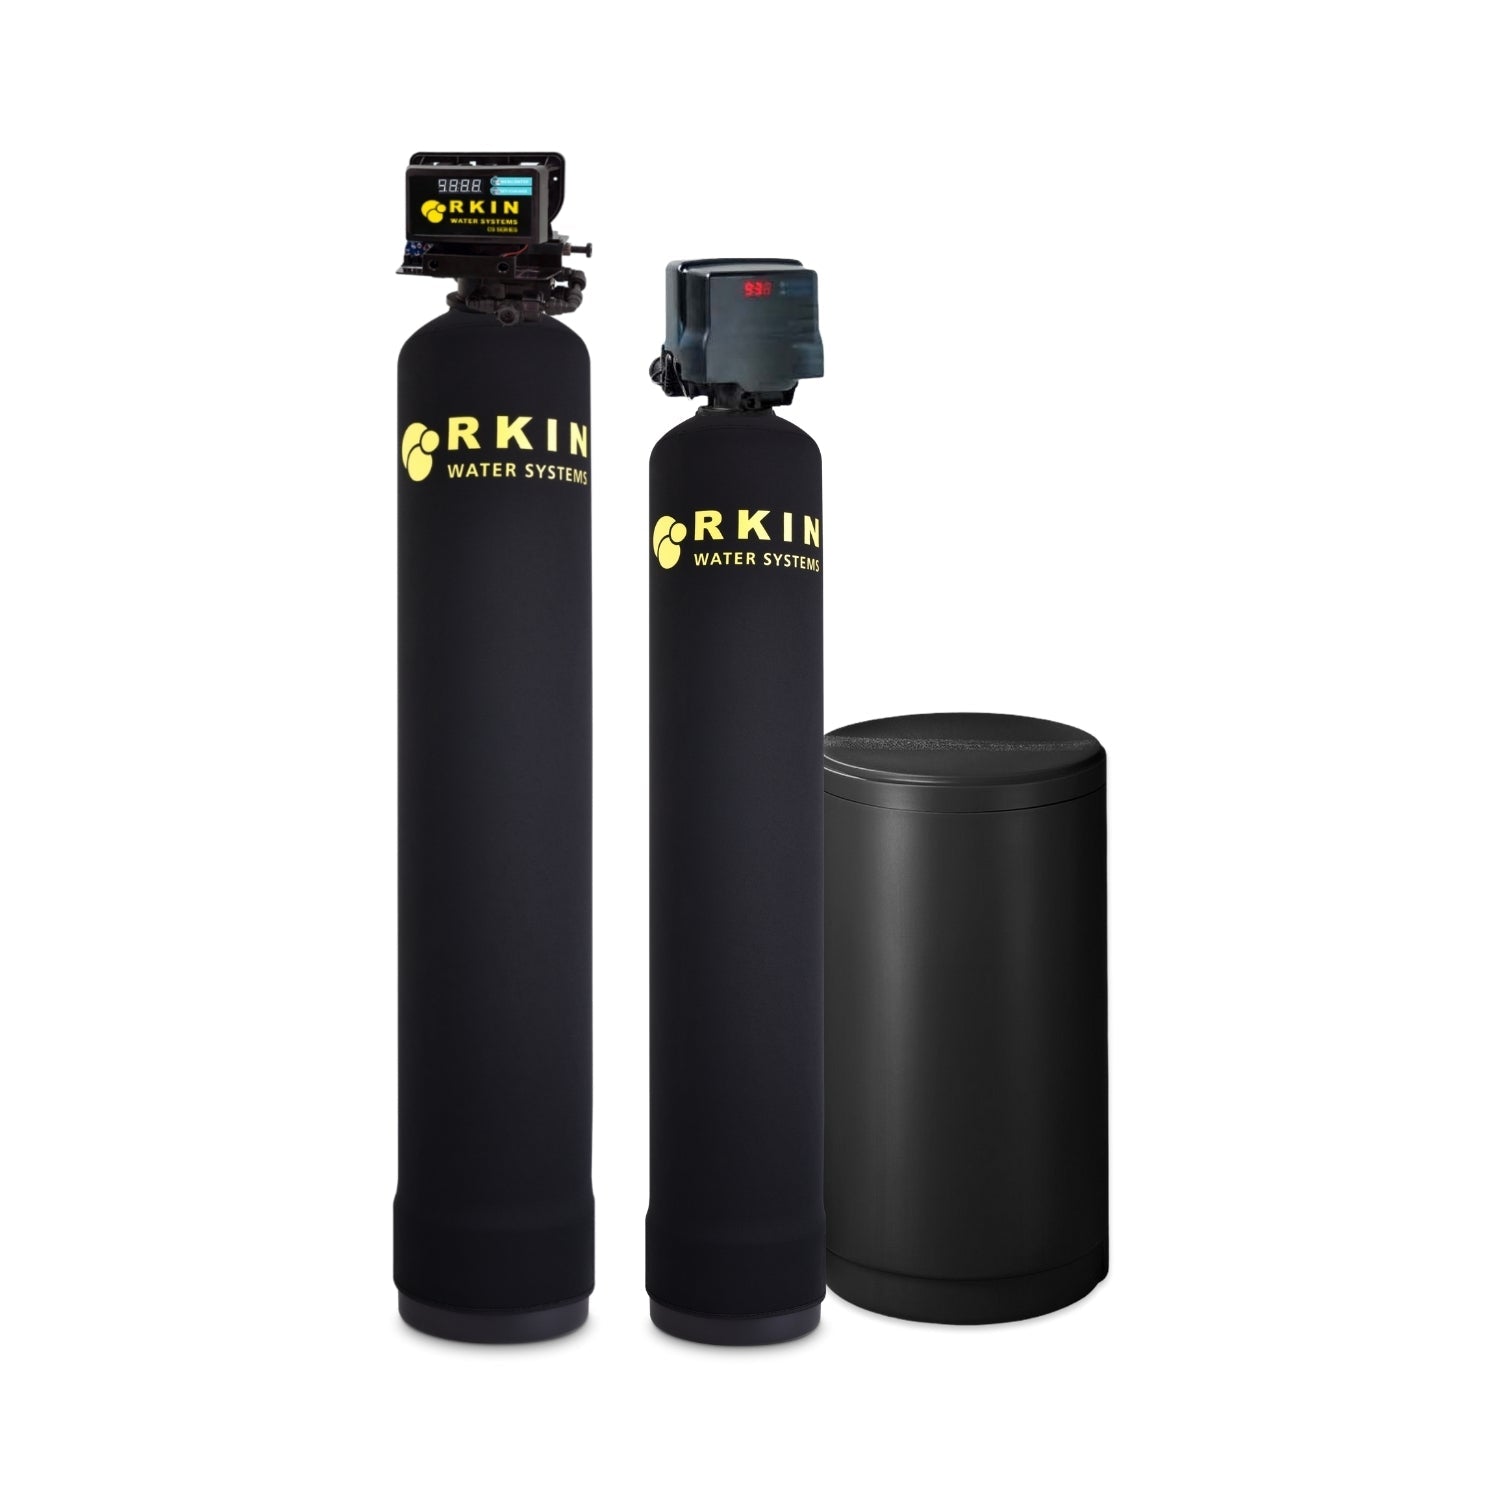 Salt Based Water Softener and Well Water Filter Combo from RKIN